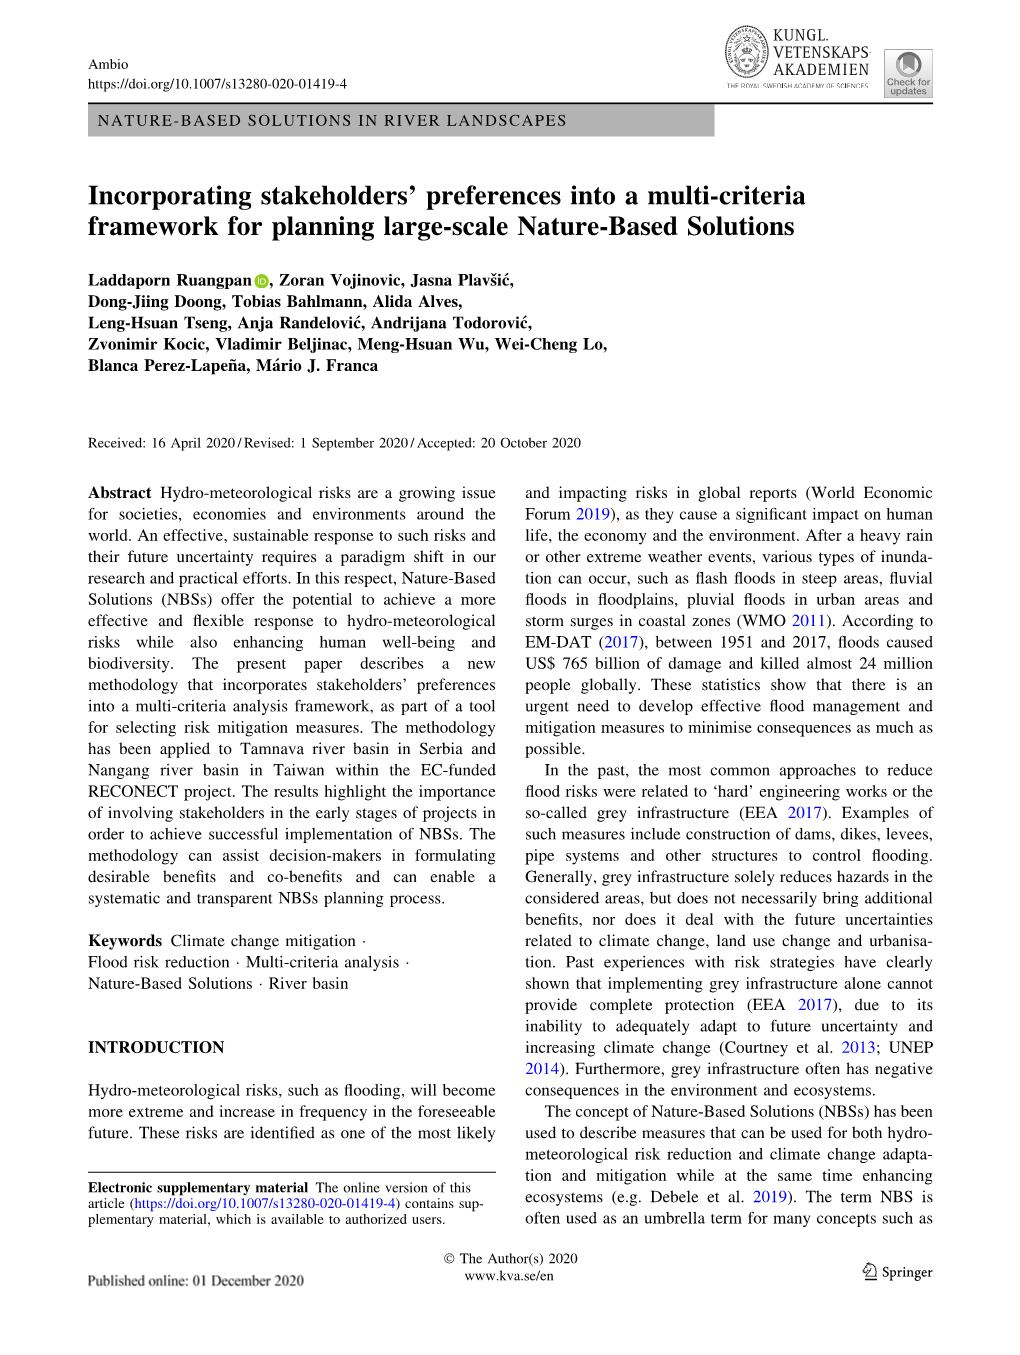 Incorporating Stakeholders' Preferences Into a Multi-Criteria